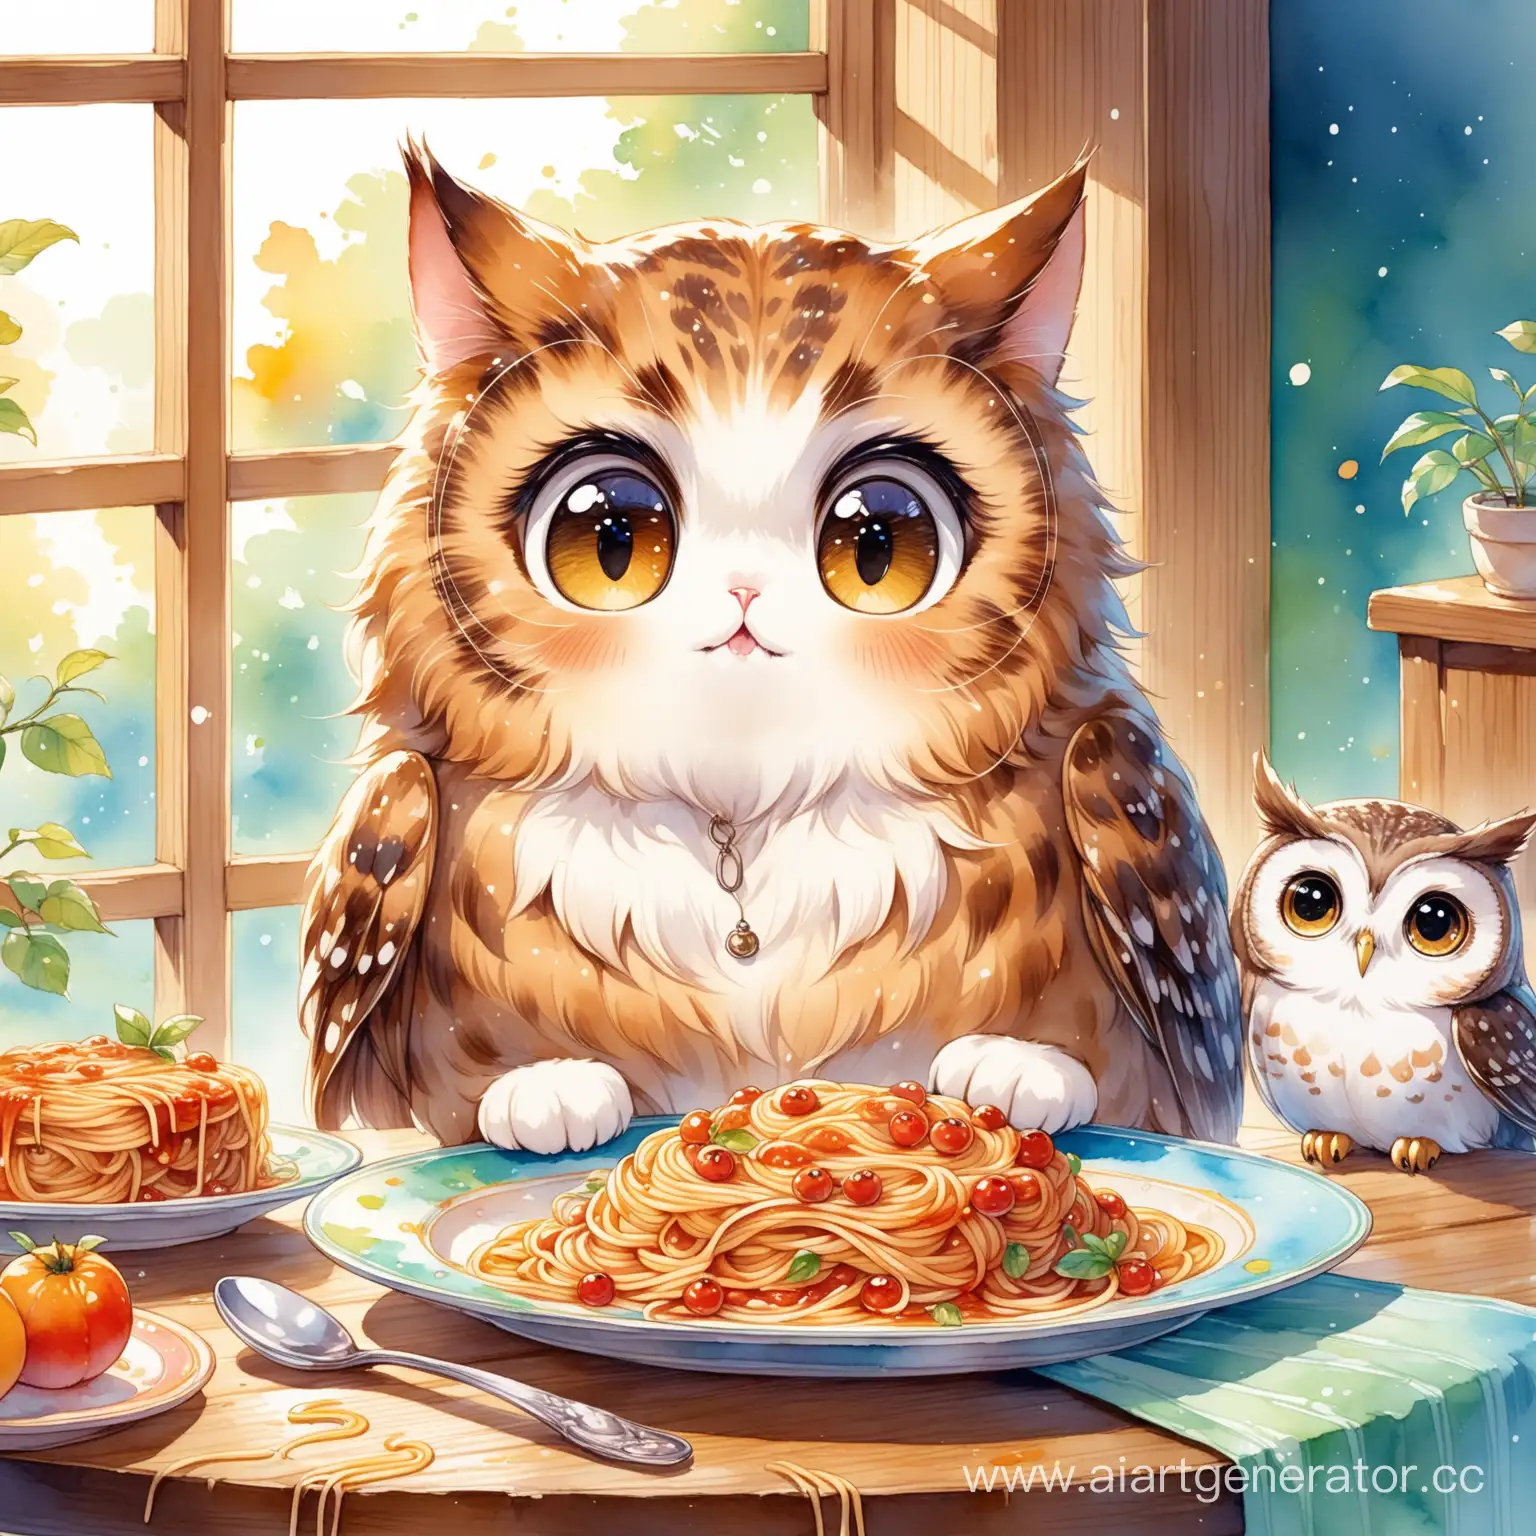 Adorable-Cat-Enjoying-Spaghetti-with-Playful-Owl-Whimsical-Watercolor-Art